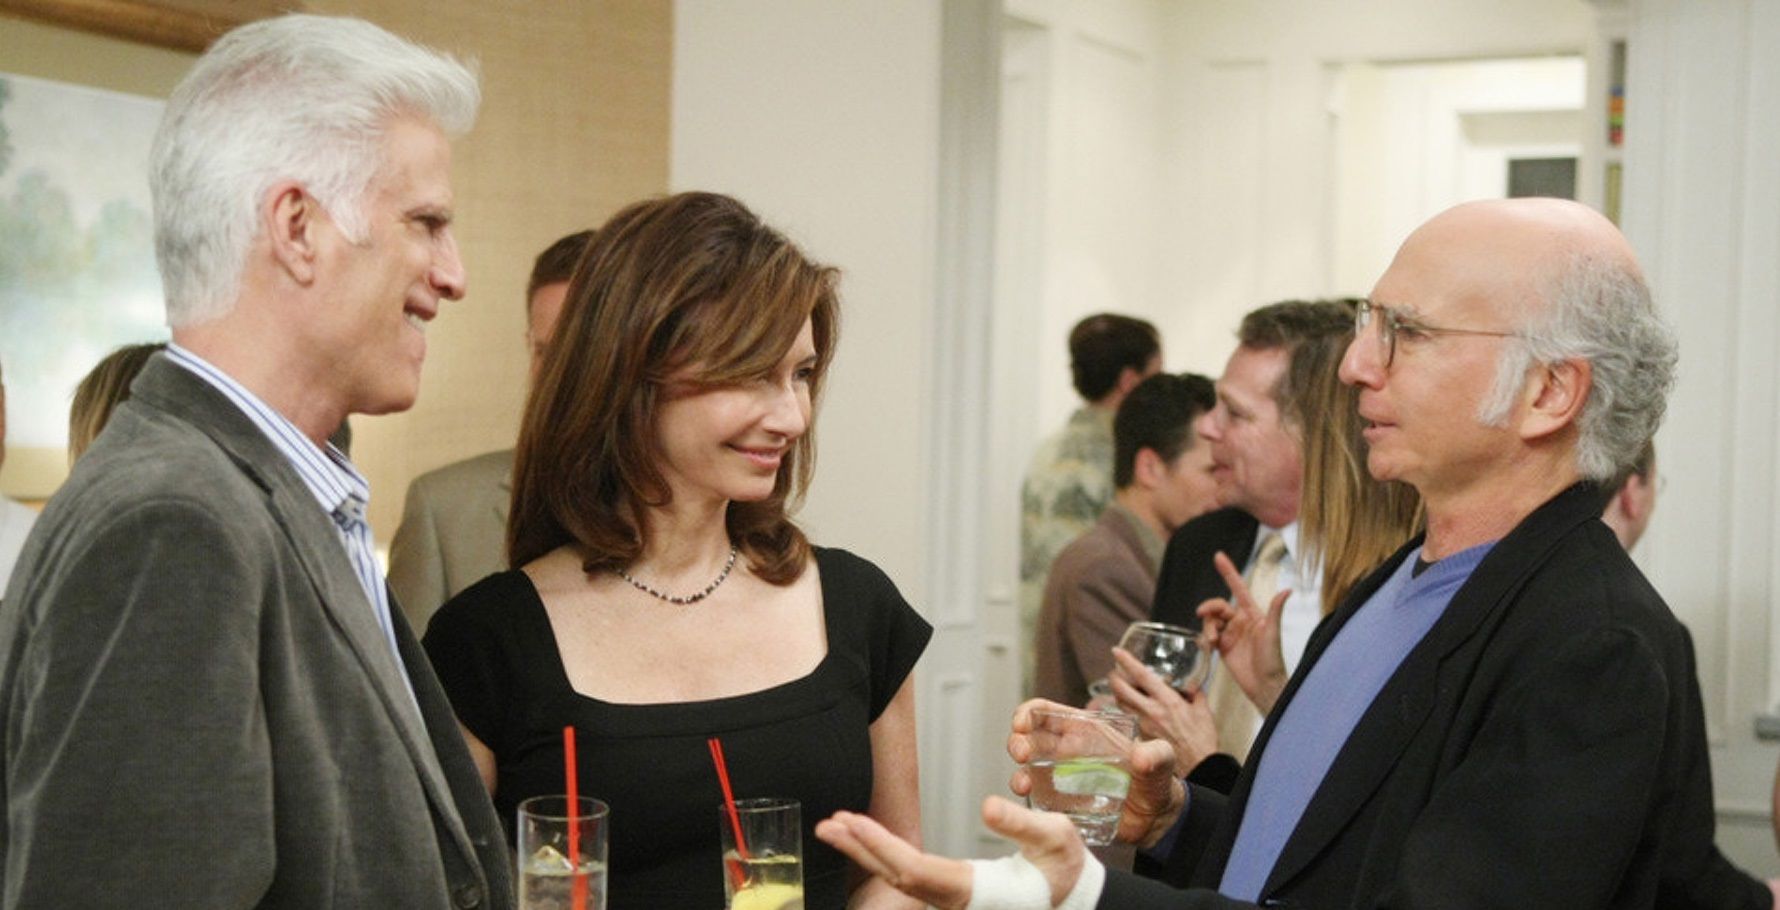 Ted, Mary, and Larry at the anniversary party in Curb Your Enthusiasm